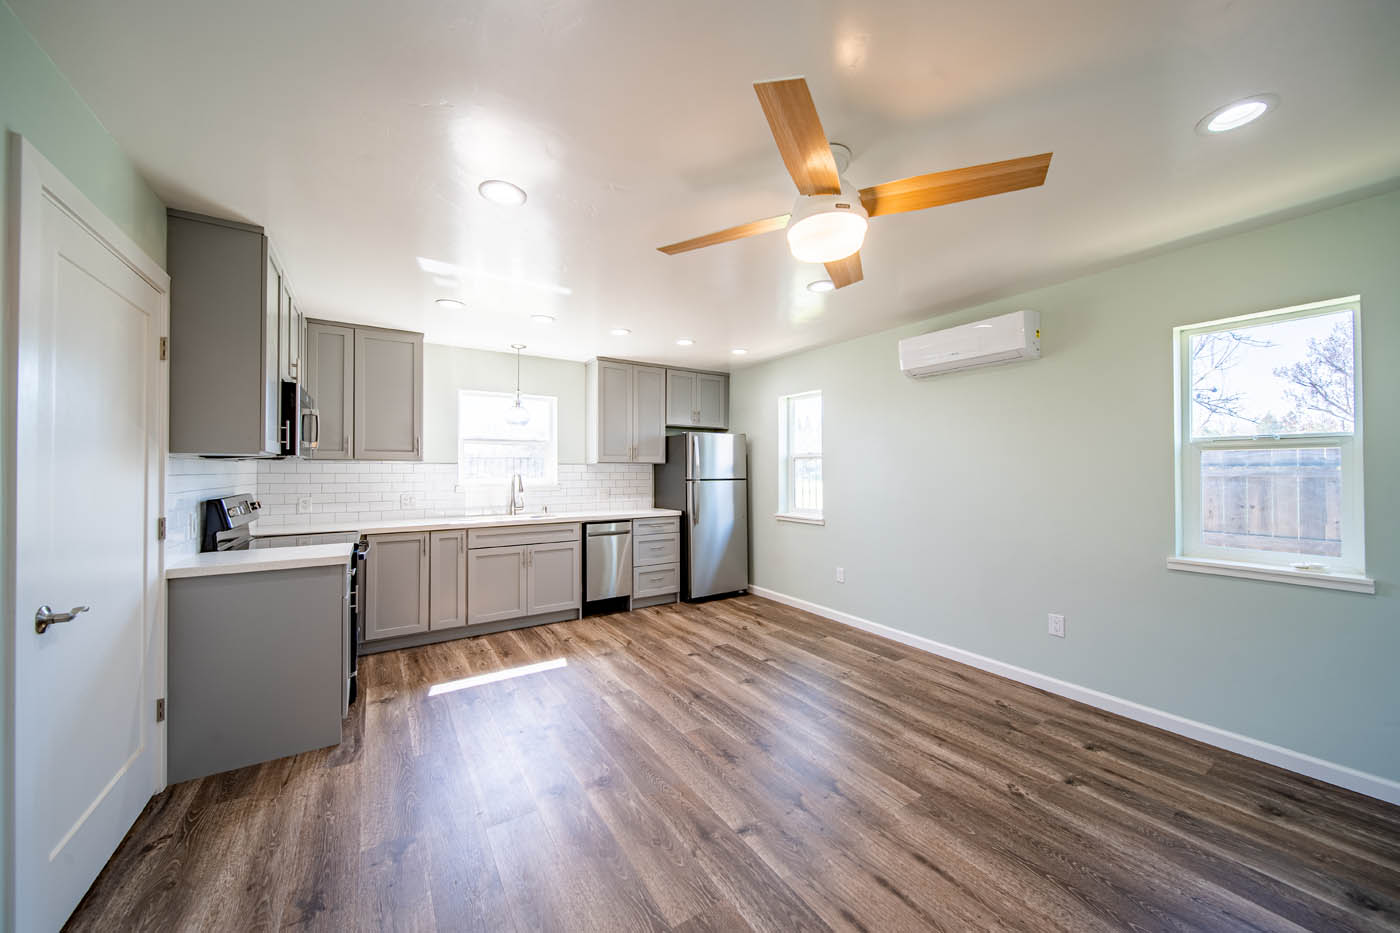 Anchored Tiny Homes Boise ADU Gallery: 2-Bedroom ADUs. - 4